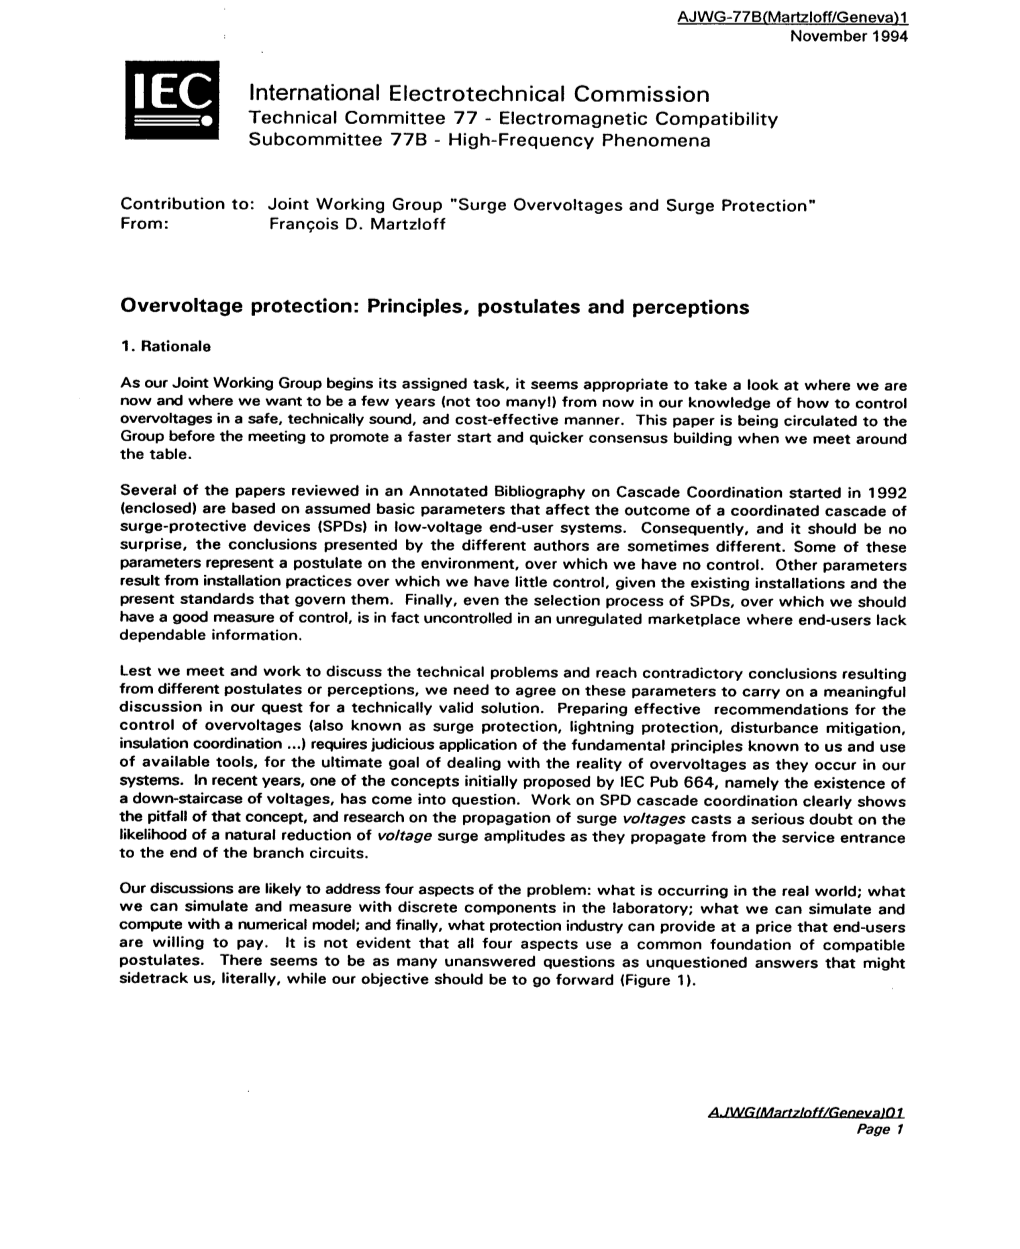 Overvoltage Protection: Principles, Postulates and Perceptions